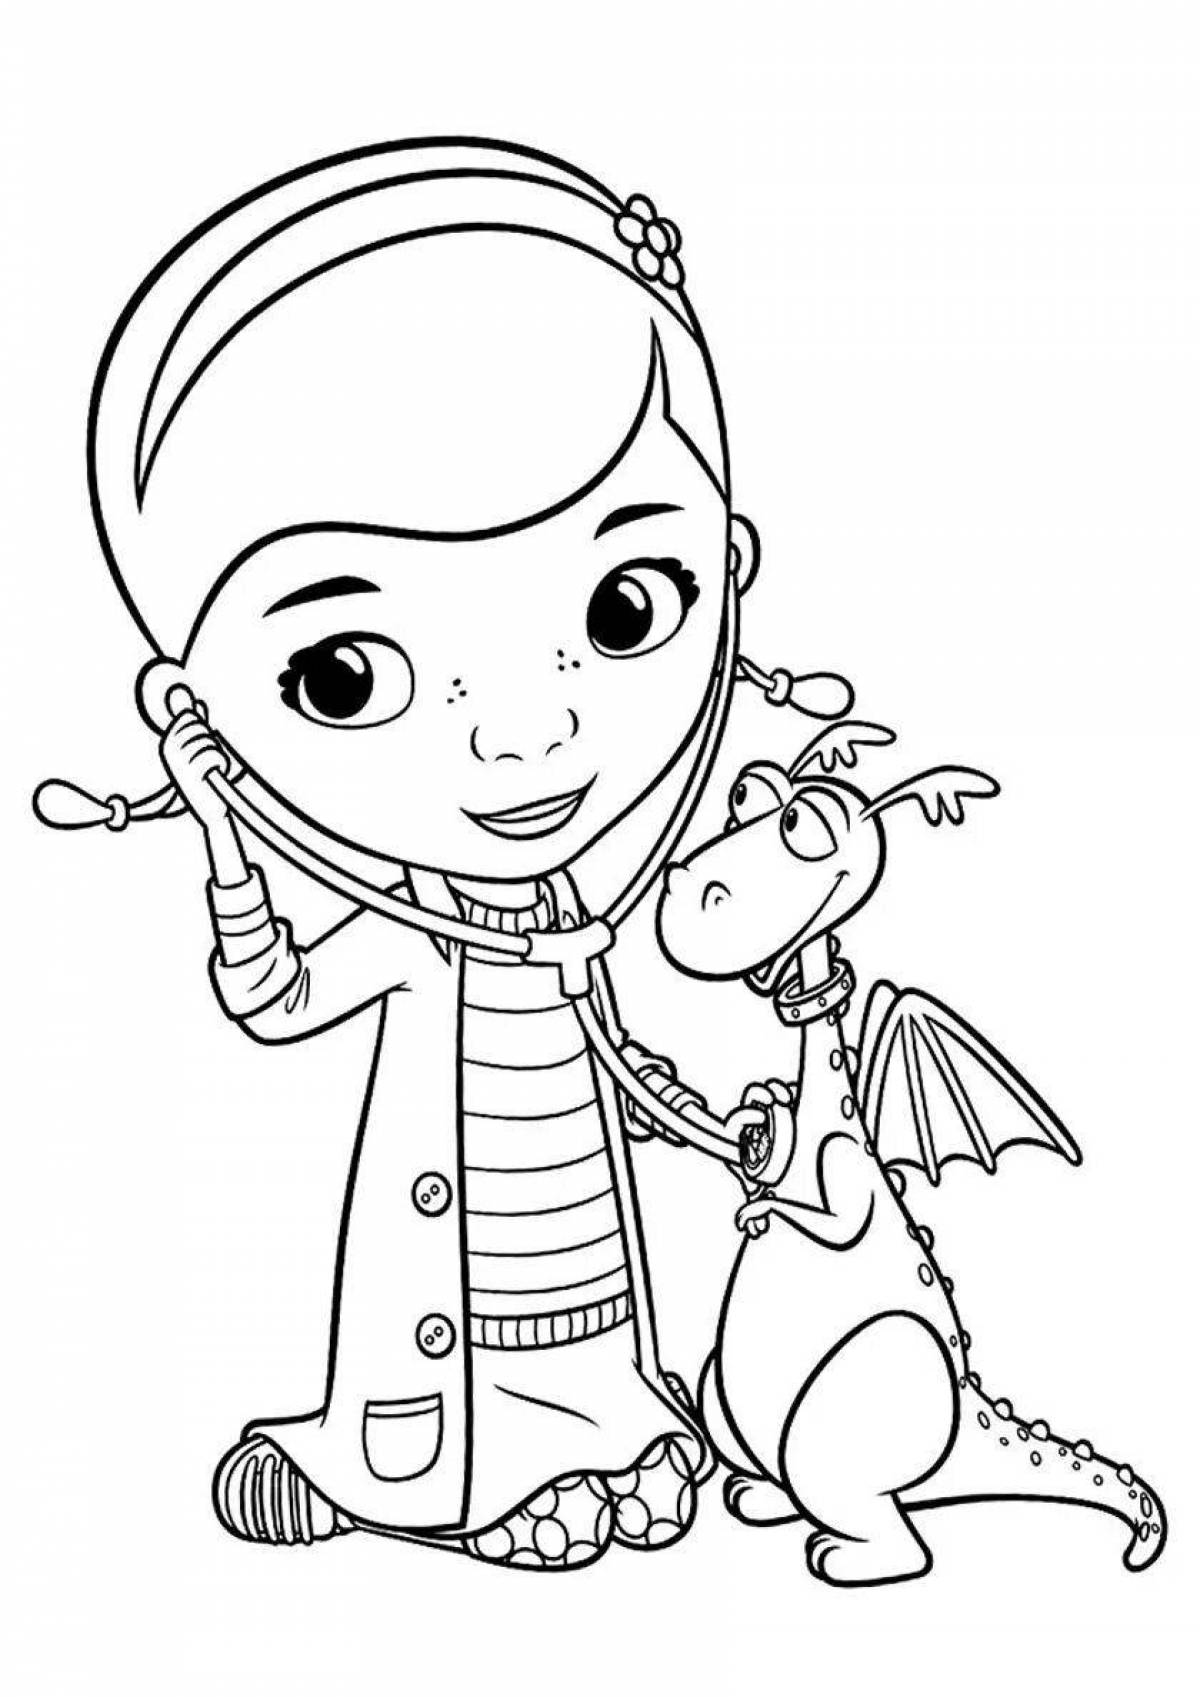 Magic doctor plush coloring book for kids